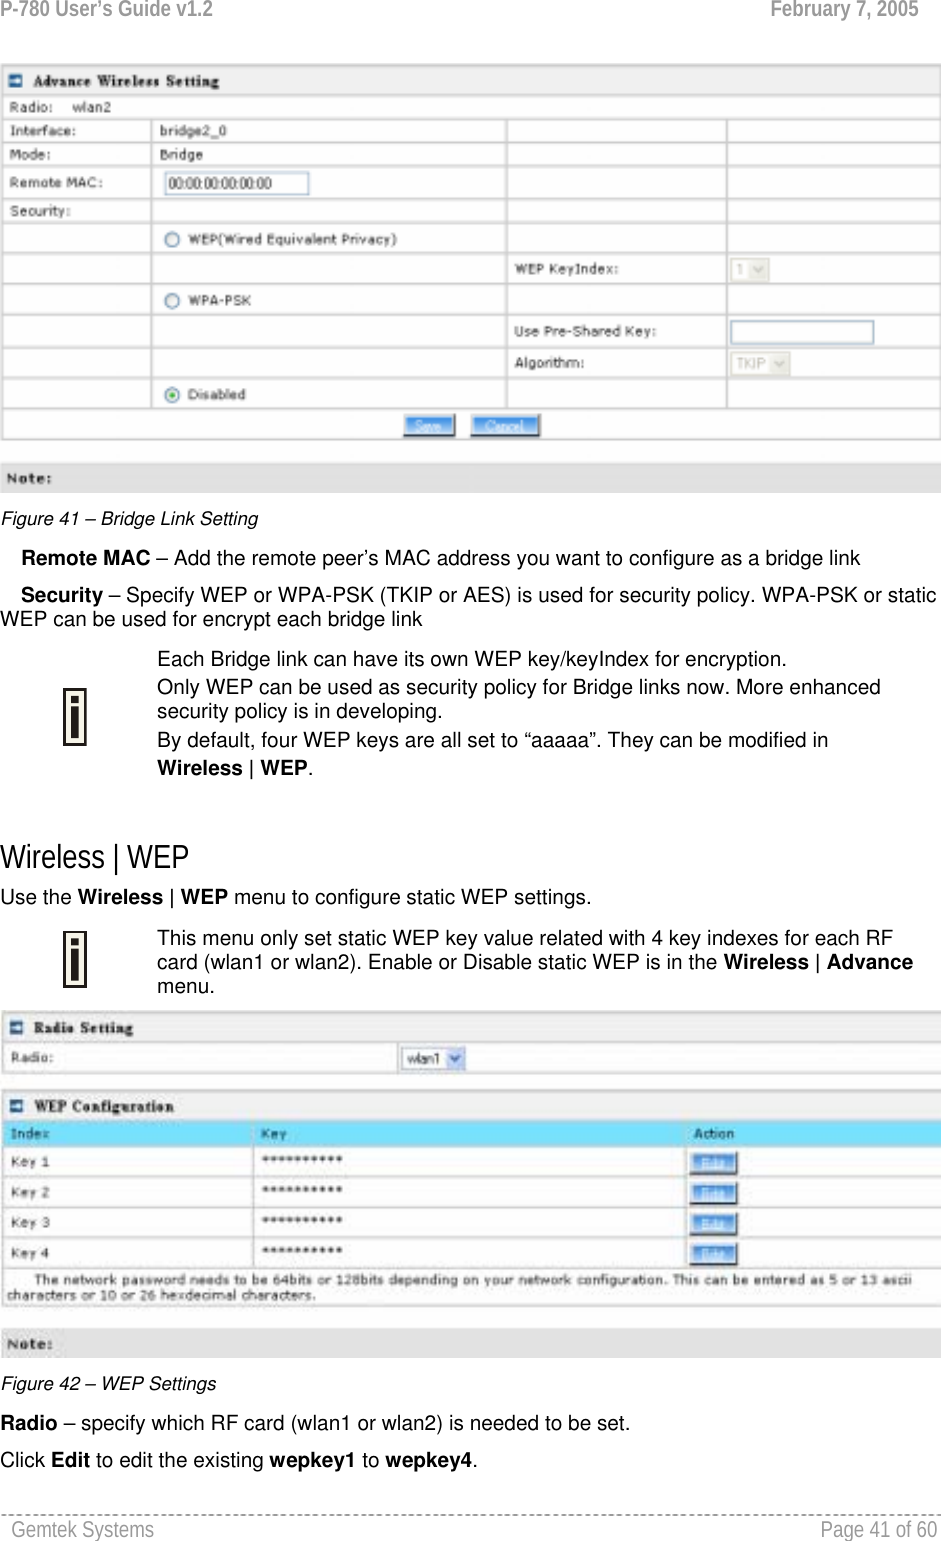 P-780 User’s Guide v1.2  February 7, 2005 Gemtek Systems    Page 41 of 60    Figure 41 – Bridge Link Setting Remote MAC – Add the remote peer’s MAC address you want to configure as a bridge link Security – Specify WEP or WPA-PSK (TKIP or AES) is used for security policy. WPA-PSK or static WEP can be used for encrypt each bridge link   Each Bridge link can have its own WEP key/keyIndex for encryption.  Only WEP can be used as security policy for Bridge links now. More enhanced security policy is in developing.  By default, four WEP keys are all set to “aaaaa”. They can be modified in  Wireless | WEP.  Wireless | WEP  Use the Wireless | WEP menu to configure static WEP settings.   This menu only set static WEP key value related with 4 key indexes for each RF card (wlan1 or wlan2). Enable or Disable static WEP is in the Wireless | Advance menu.  Figure 42 – WEP Settings Radio – specify which RF card (wlan1 or wlan2) is needed to be set. Click Edit to edit the existing wepkey1 to wepkey4.  